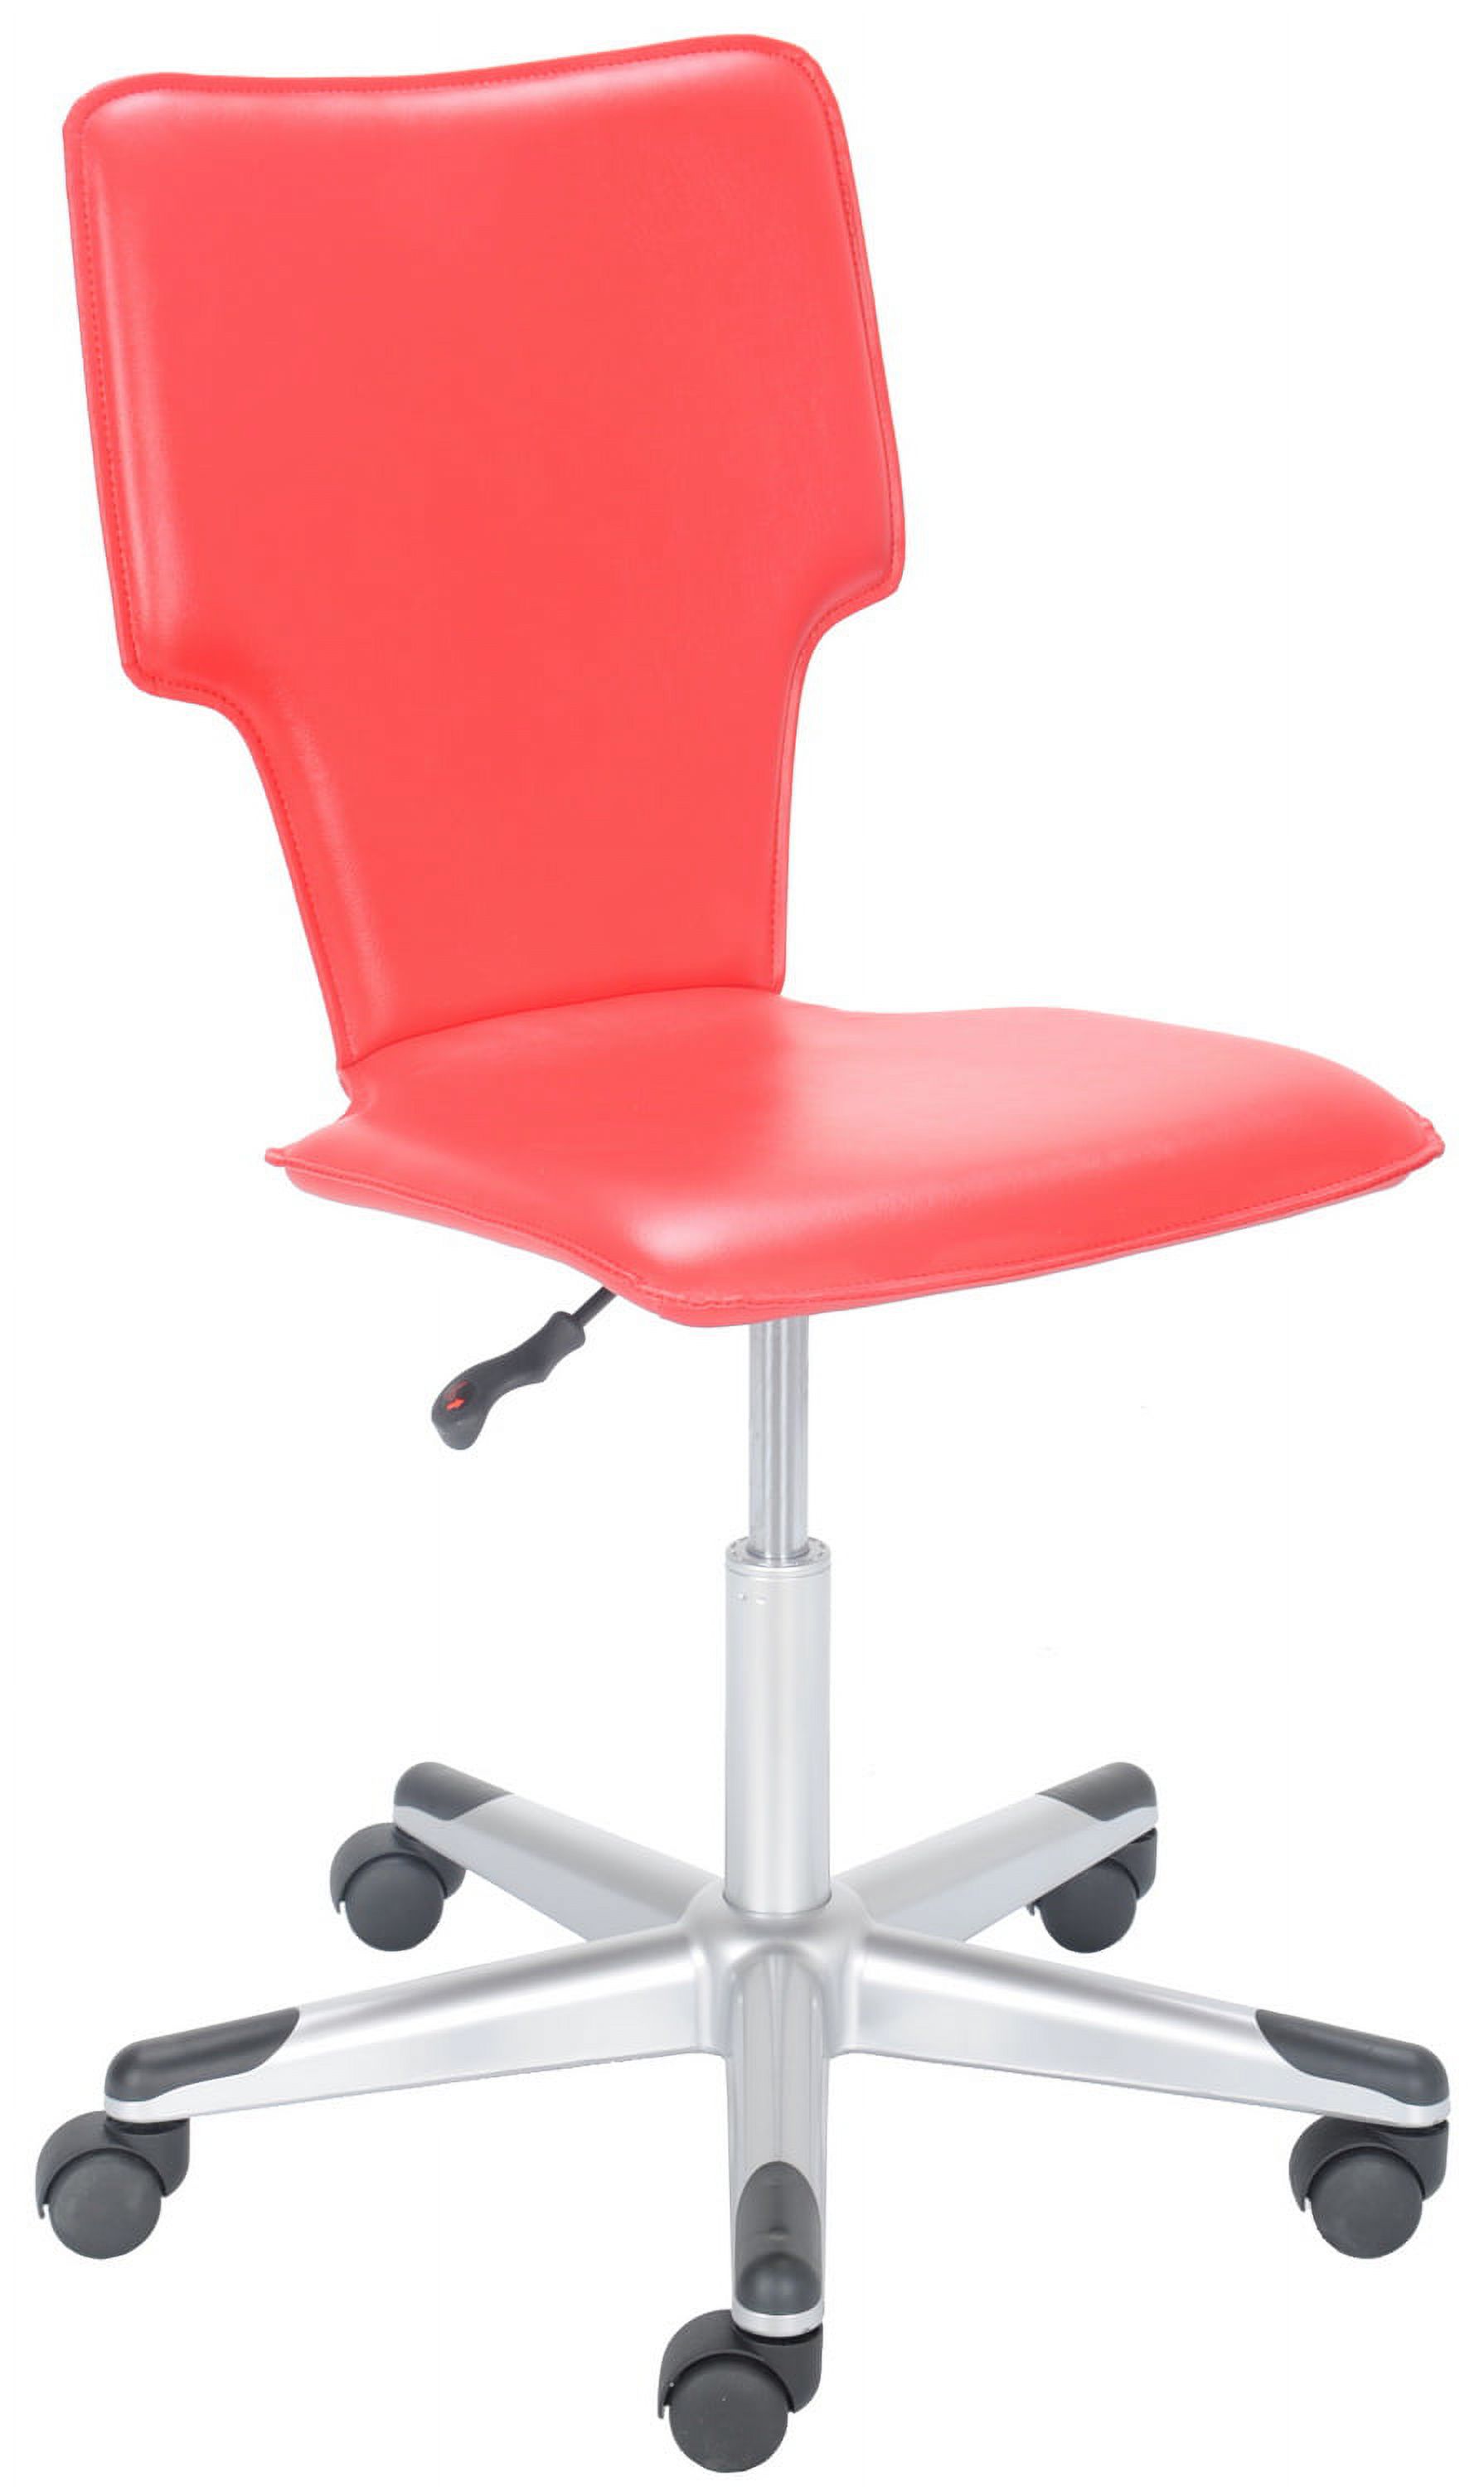 Mainstays Student Office Chair, Multiple Colors - image 5 of 5